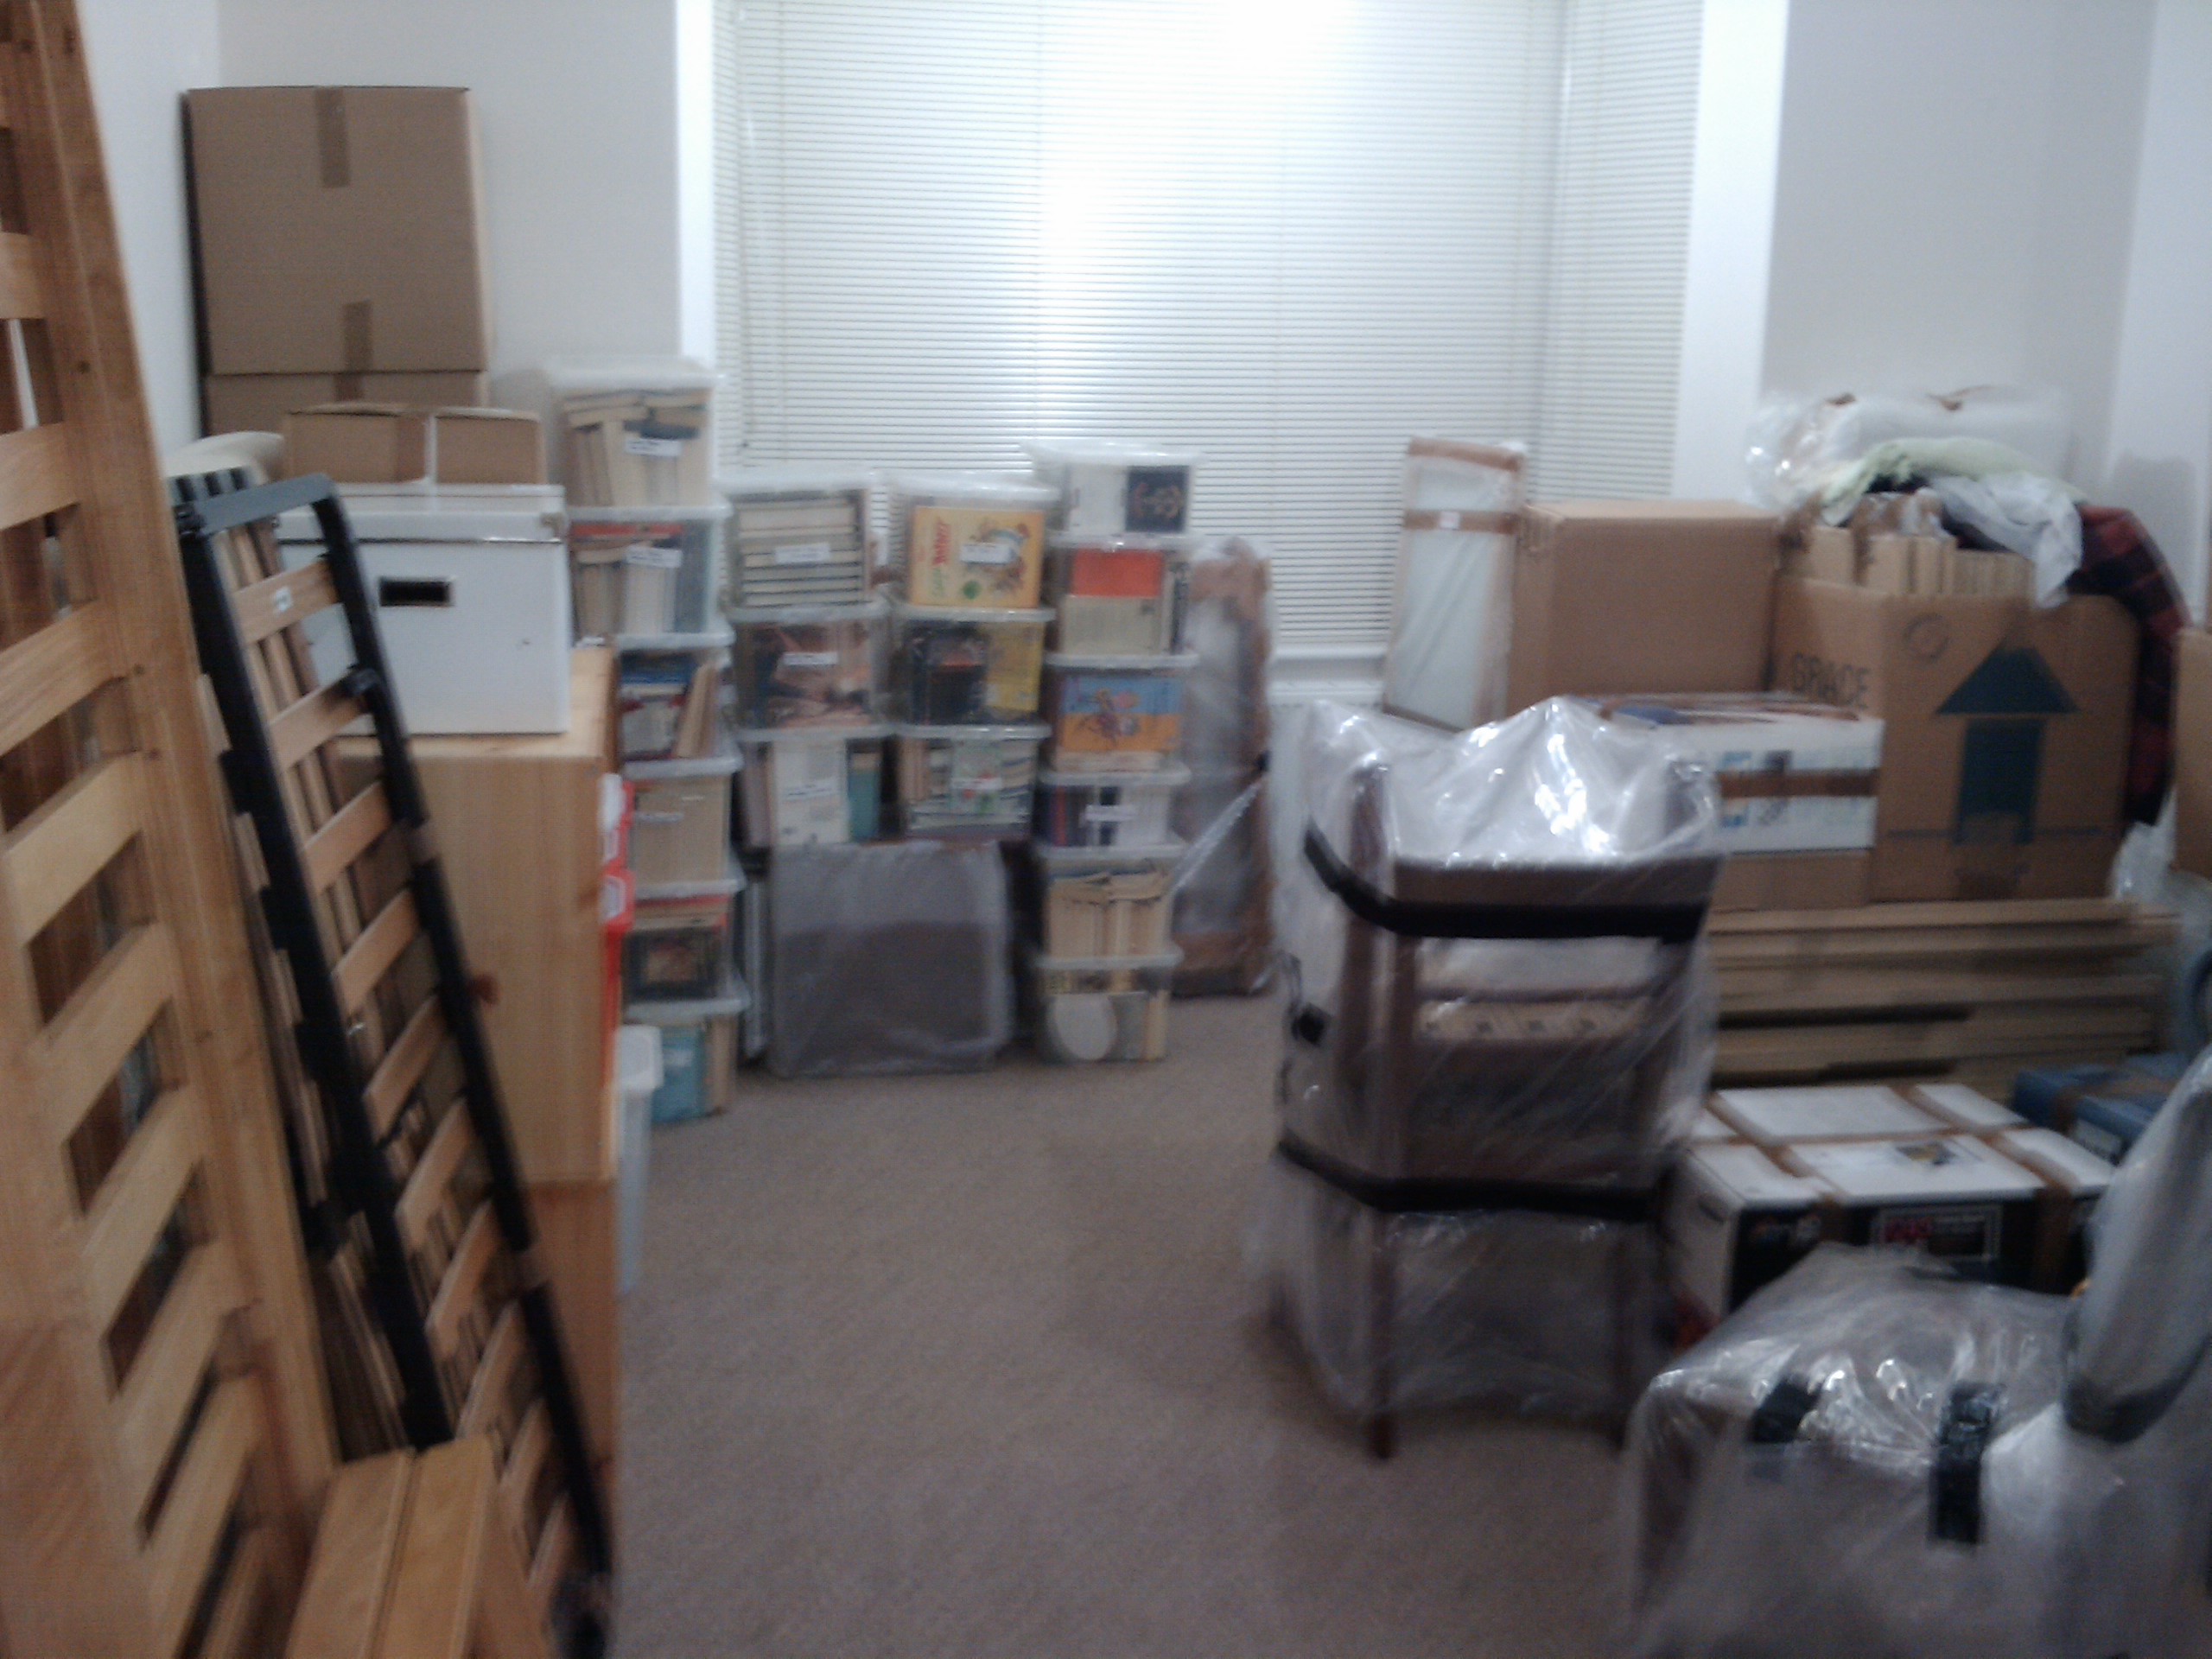 Boxes, boxes everywhere...